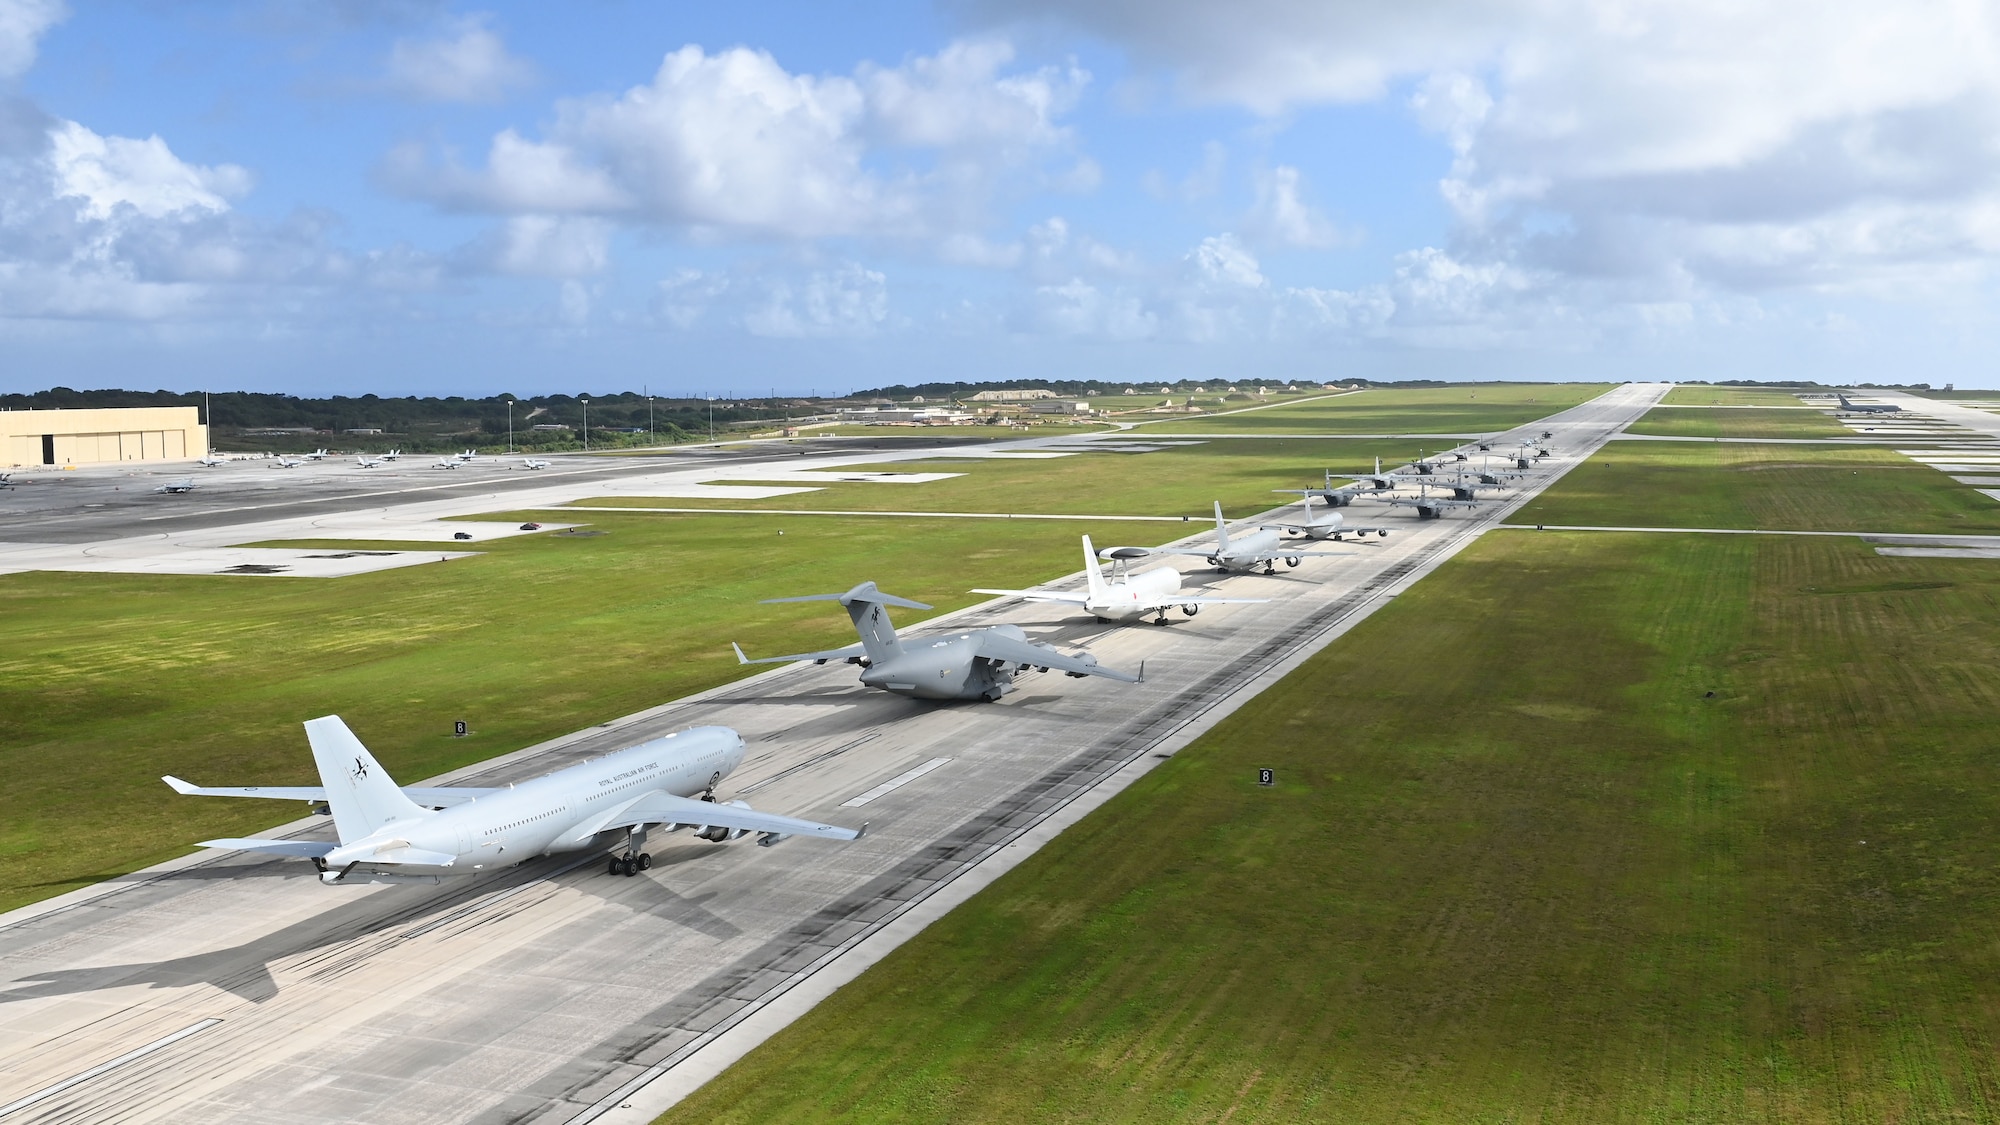 U.S. Air Force, Royal Australian Air Force and Japan Air Self-Defense Force aircraft participate in a close formation taxi, known as an Elephant Walk, during Cope North 2022 at Andersen Air Force Base, Guam, Feb. 5, 2022.